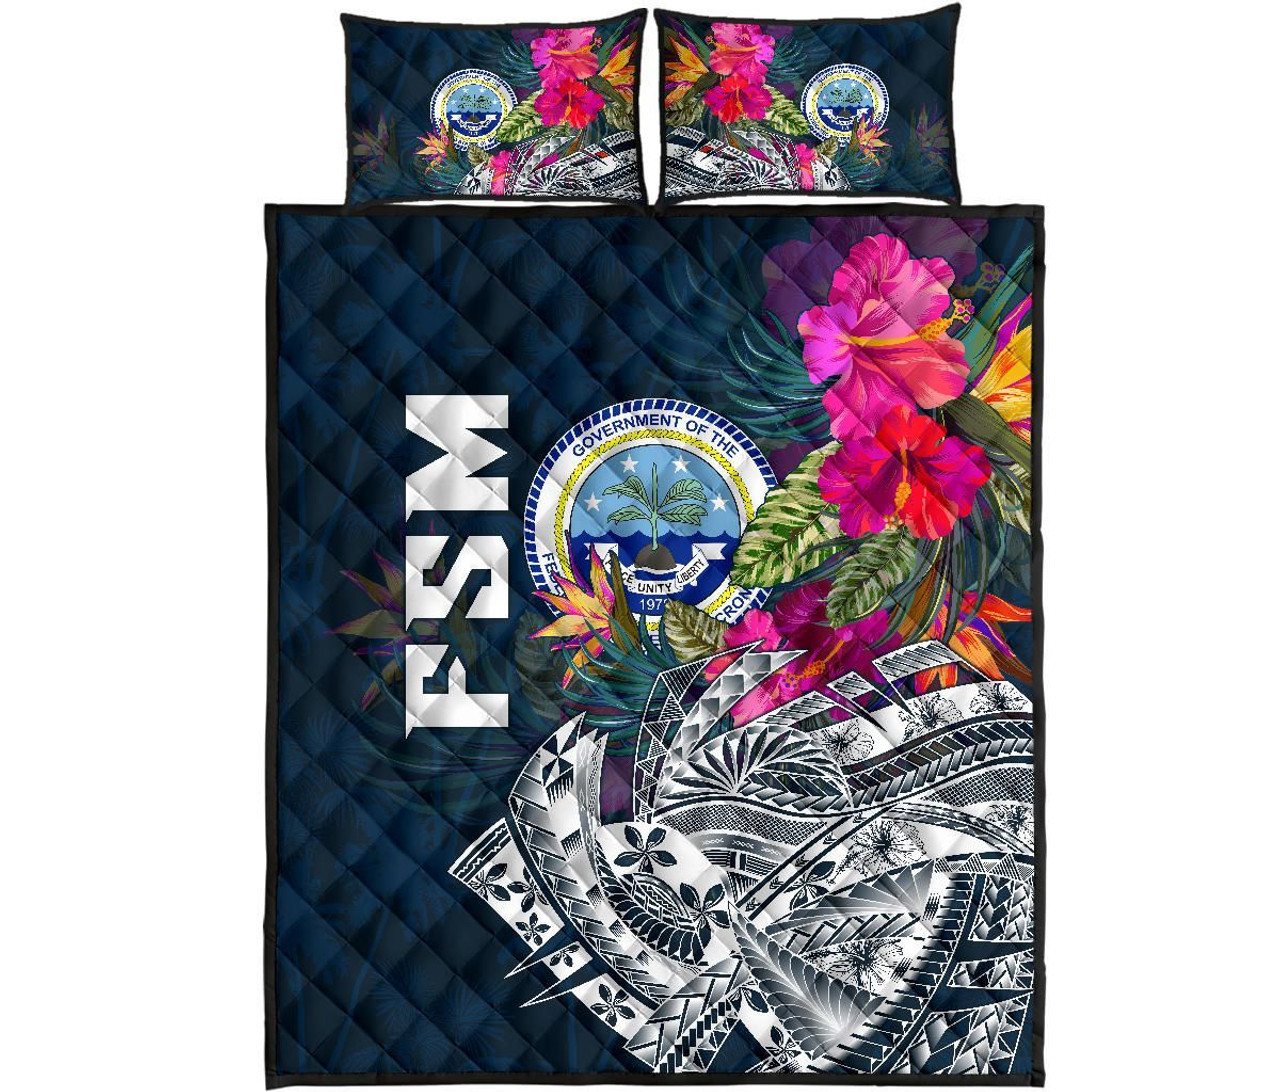 Federated States Of Micronesia Quilt Bed set - Summer Vibes 5